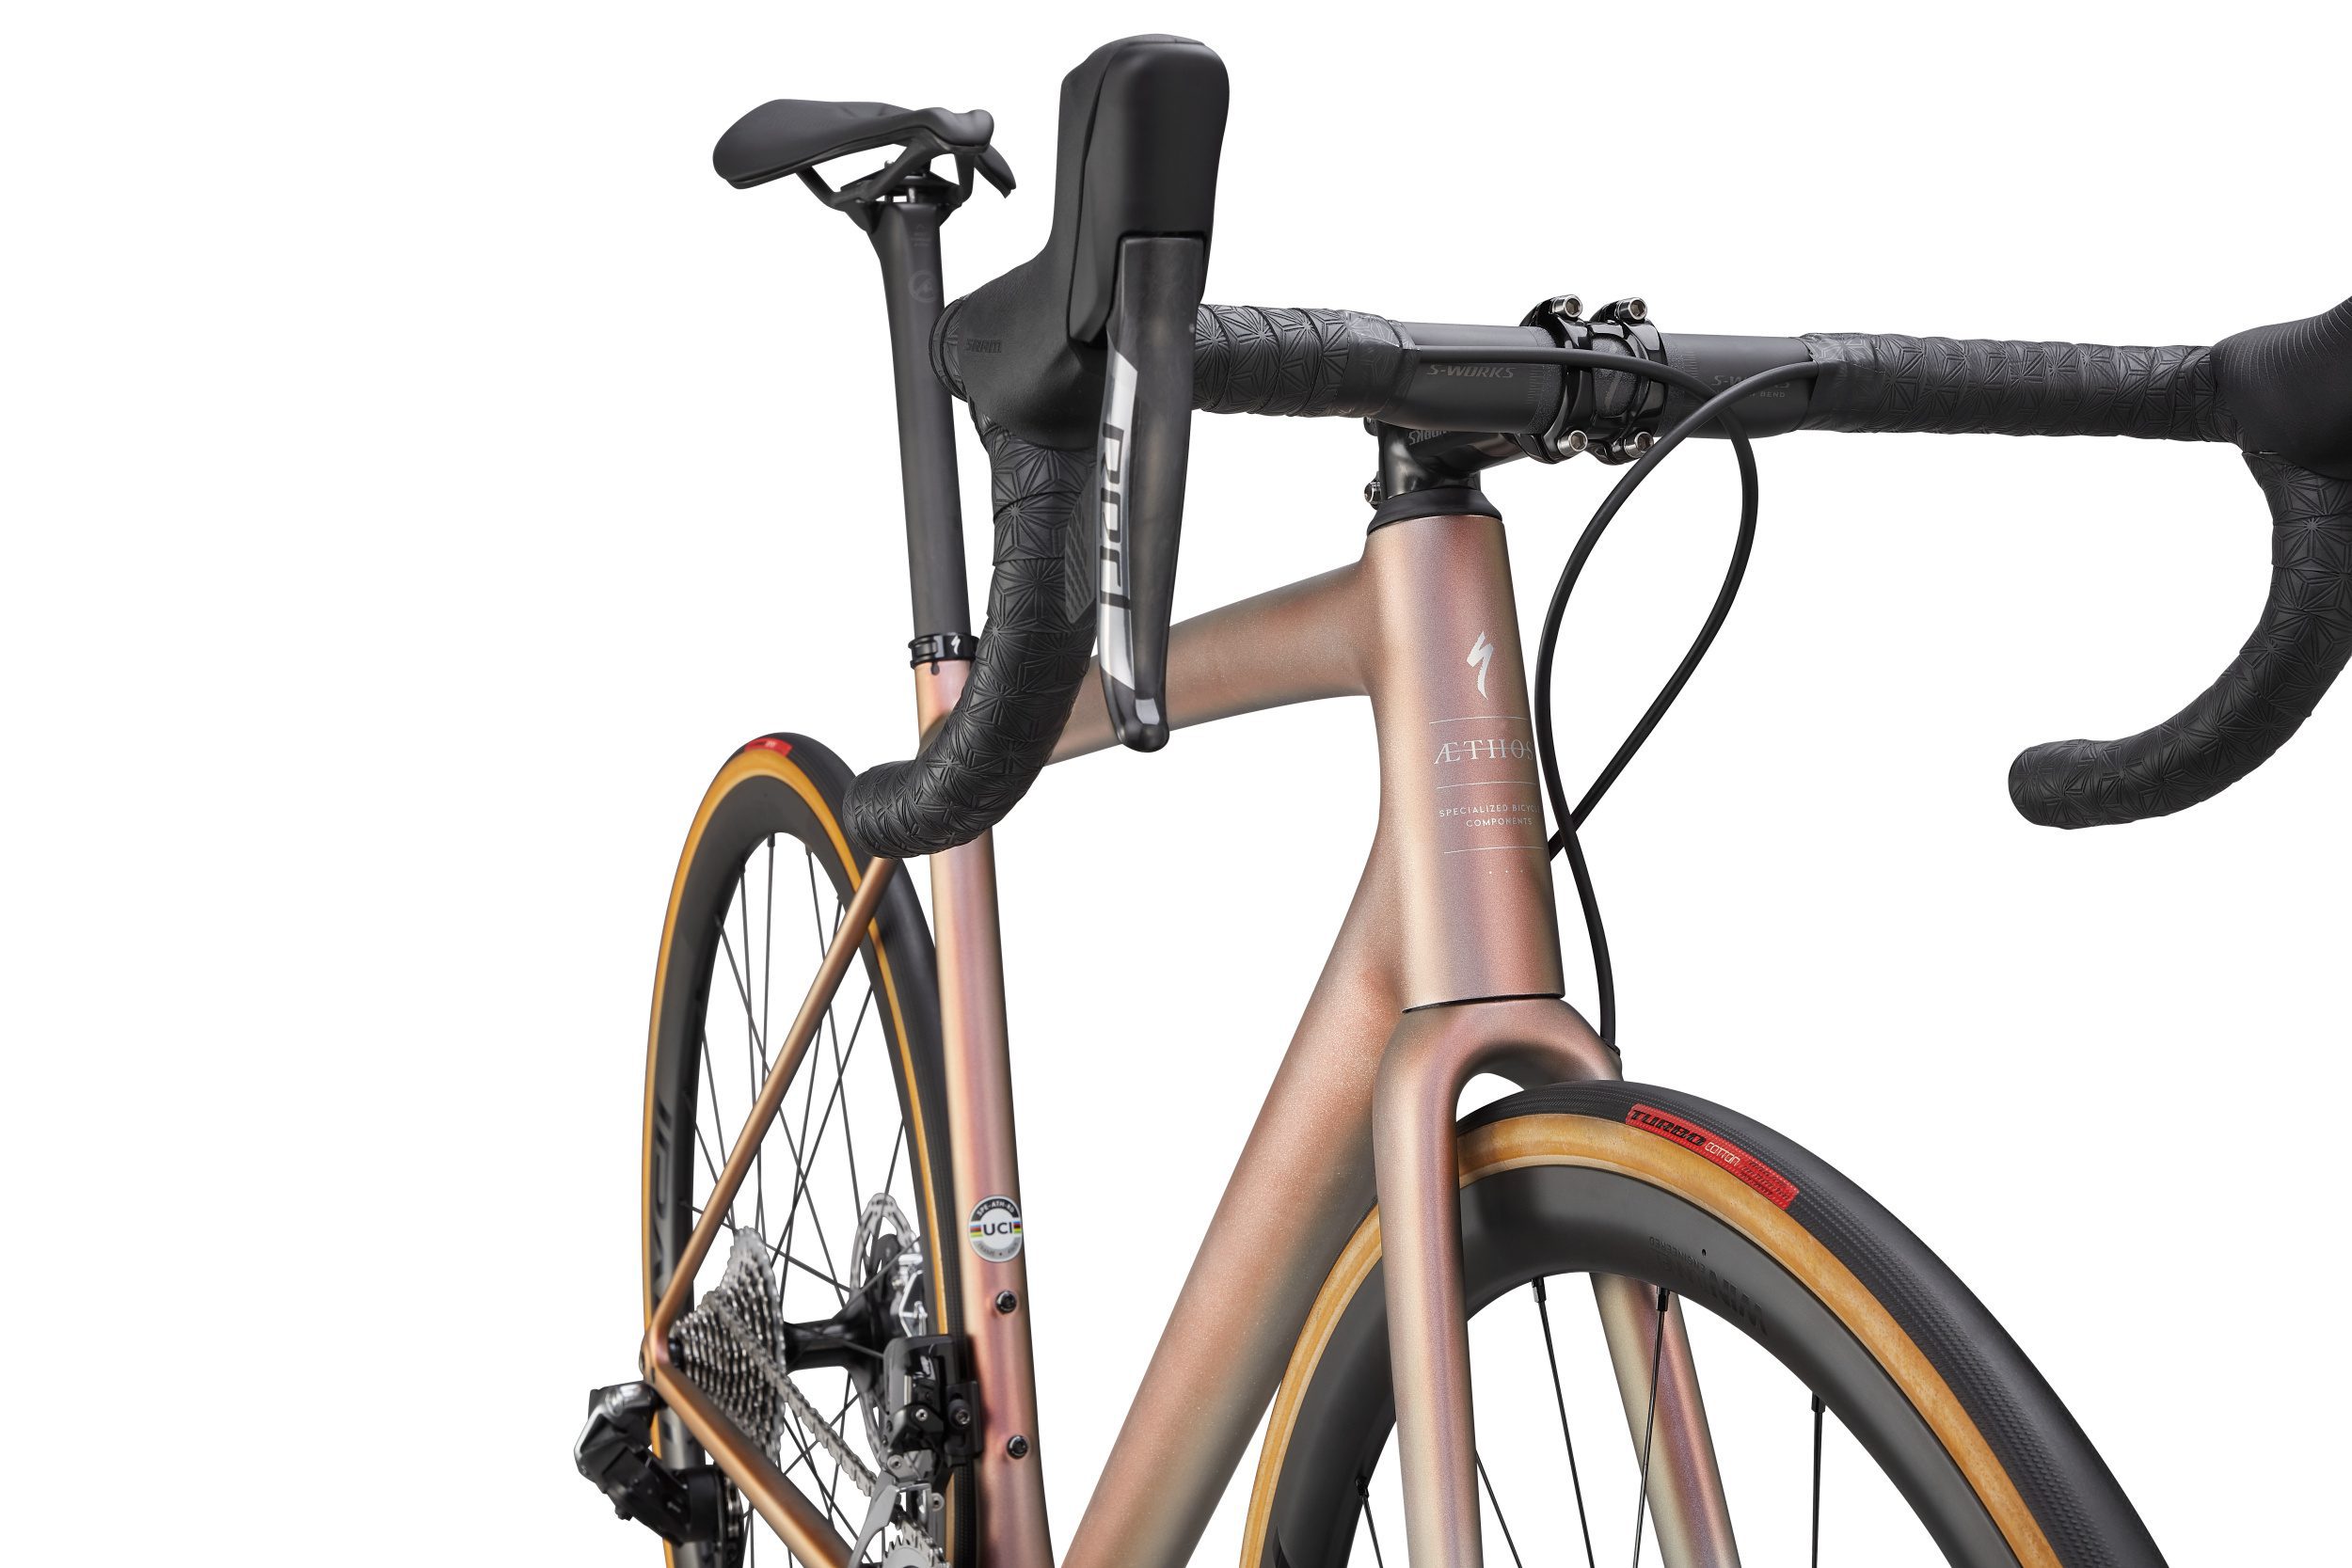 Specialized S-Works Aethos - SRAM Red ETap AXS 2021 Detailansicht in der Farbe Satin Flake Silver/Red Gold Chameleon Tint/Brushed Chrome